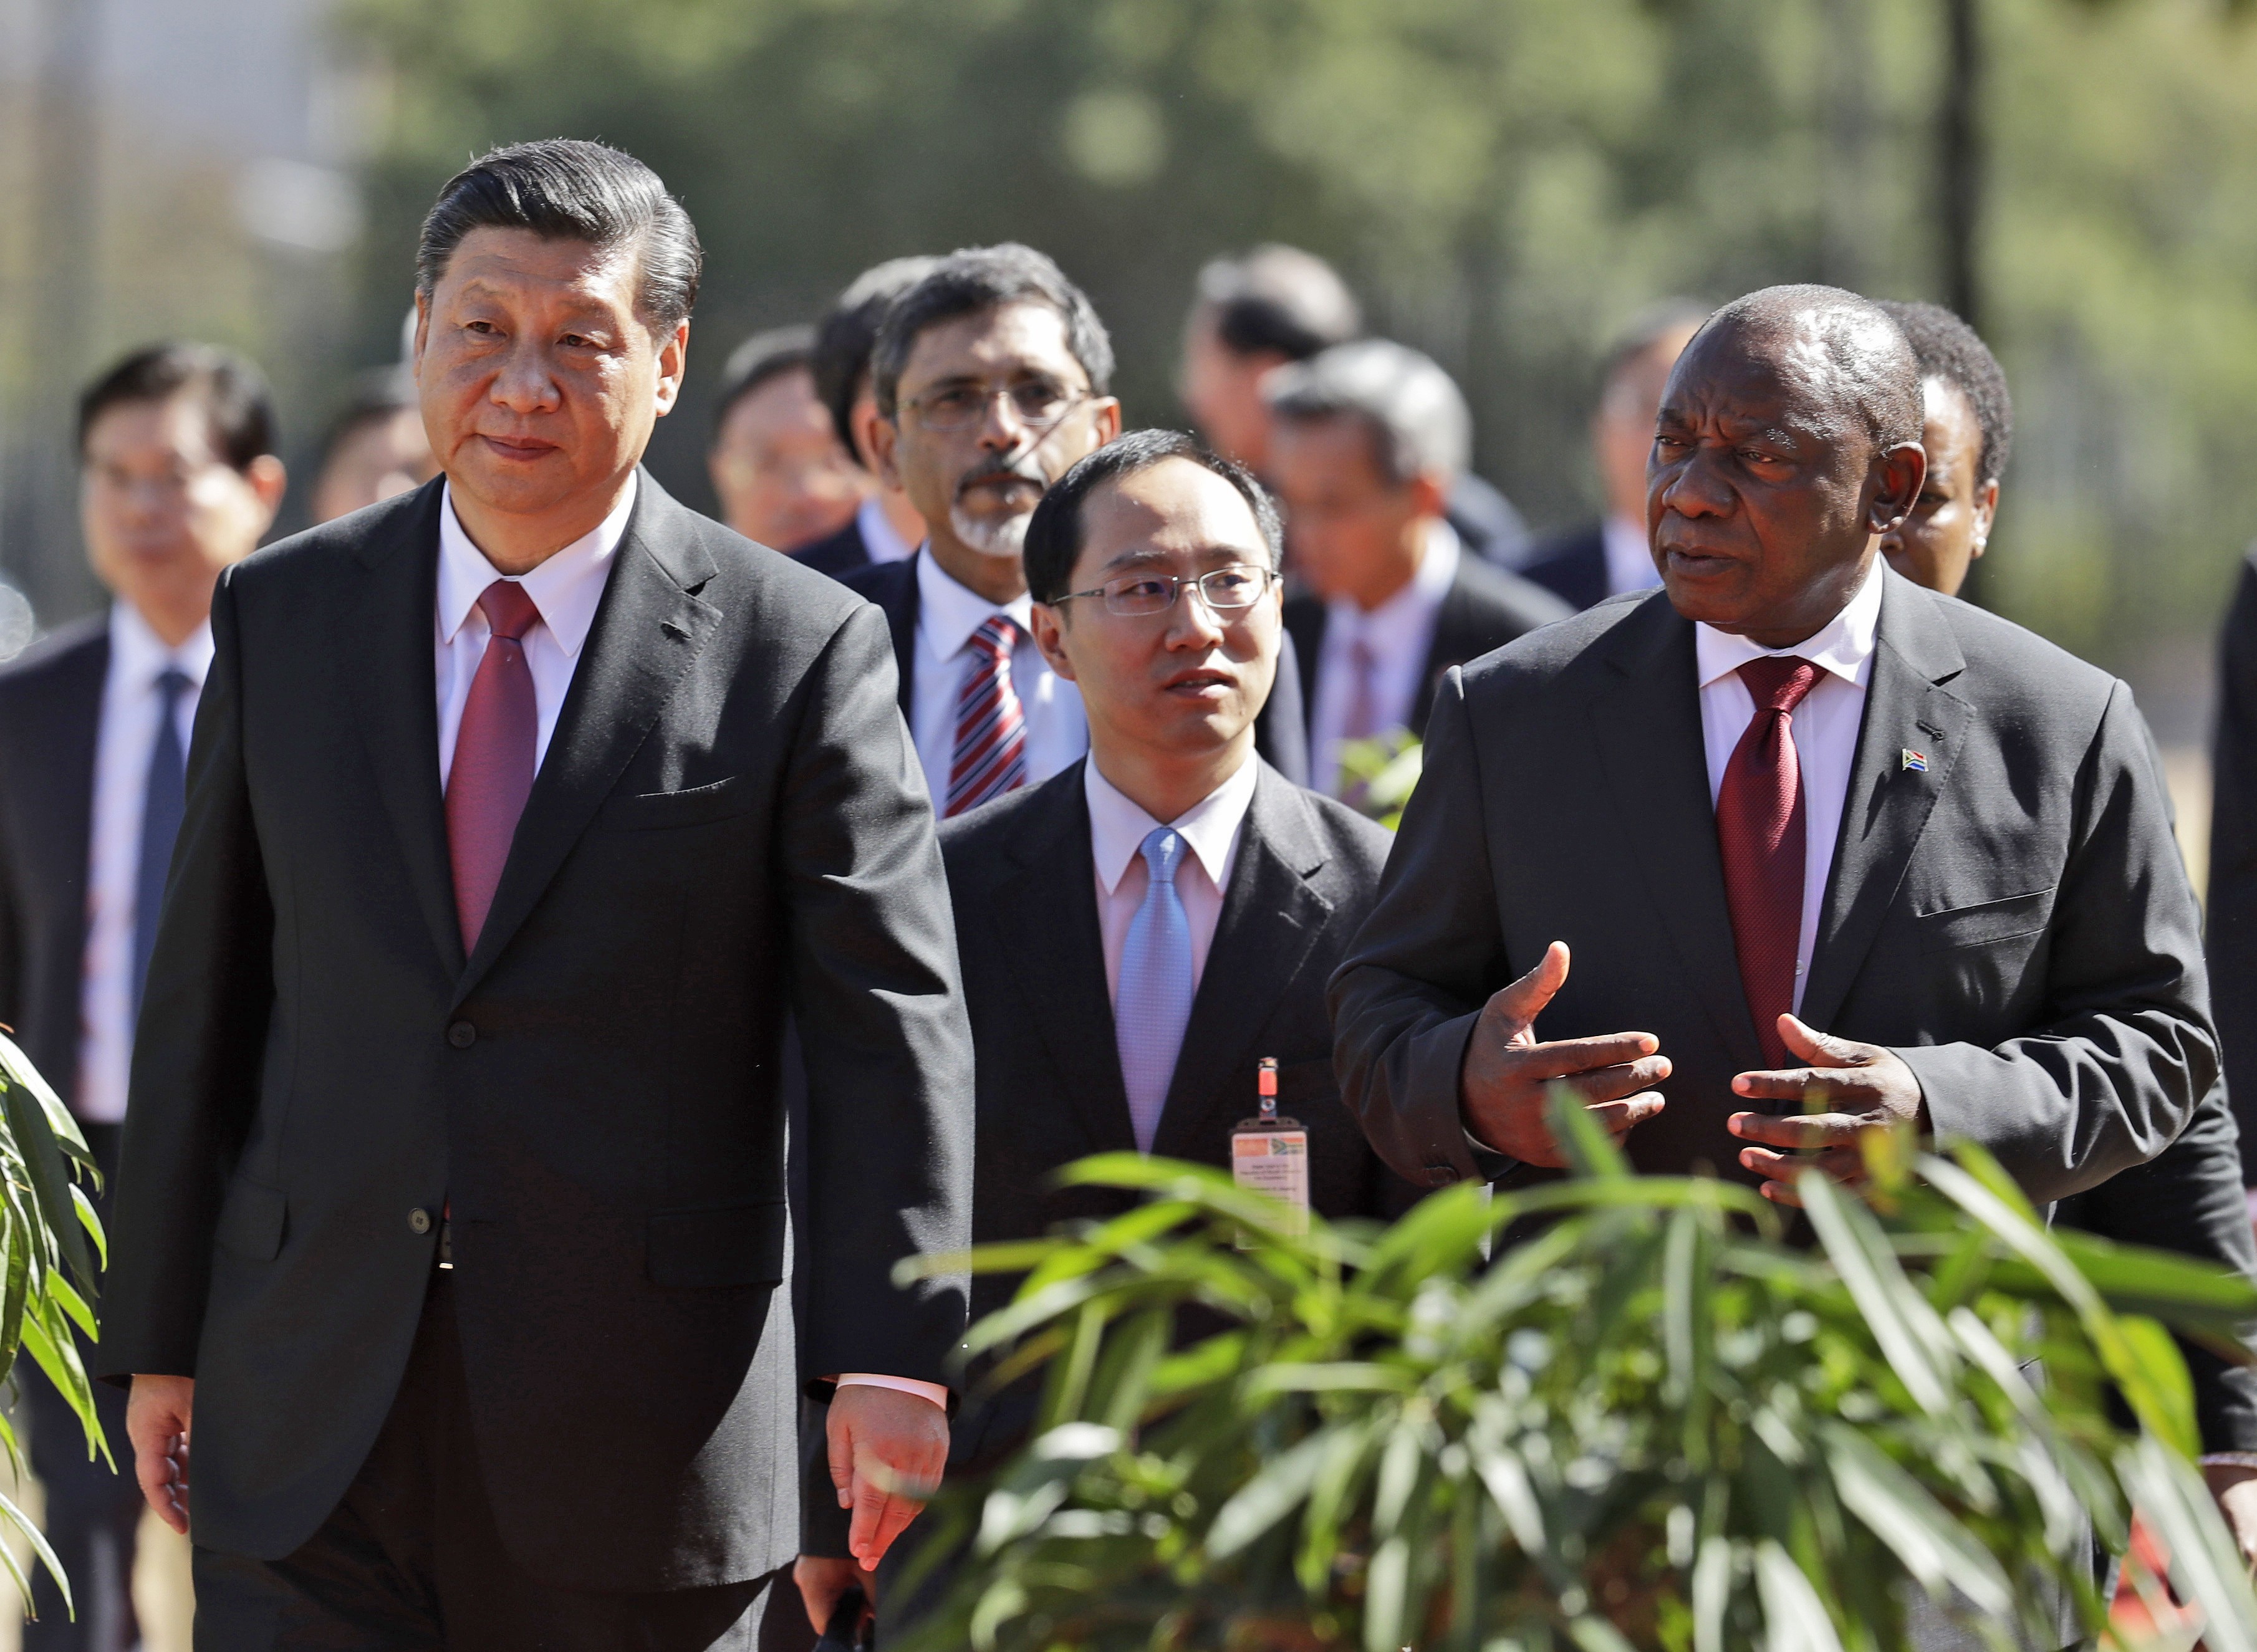 China’s President Xi Jinping (left) walks with South African President Cyril Ramaphosa after a joint press conference at the government’s Union Buildings in Pretoria, South Africa, on July 24. Xi is in the country to attend the three-day BRICS Summit in Johannesburg. Photo: AP